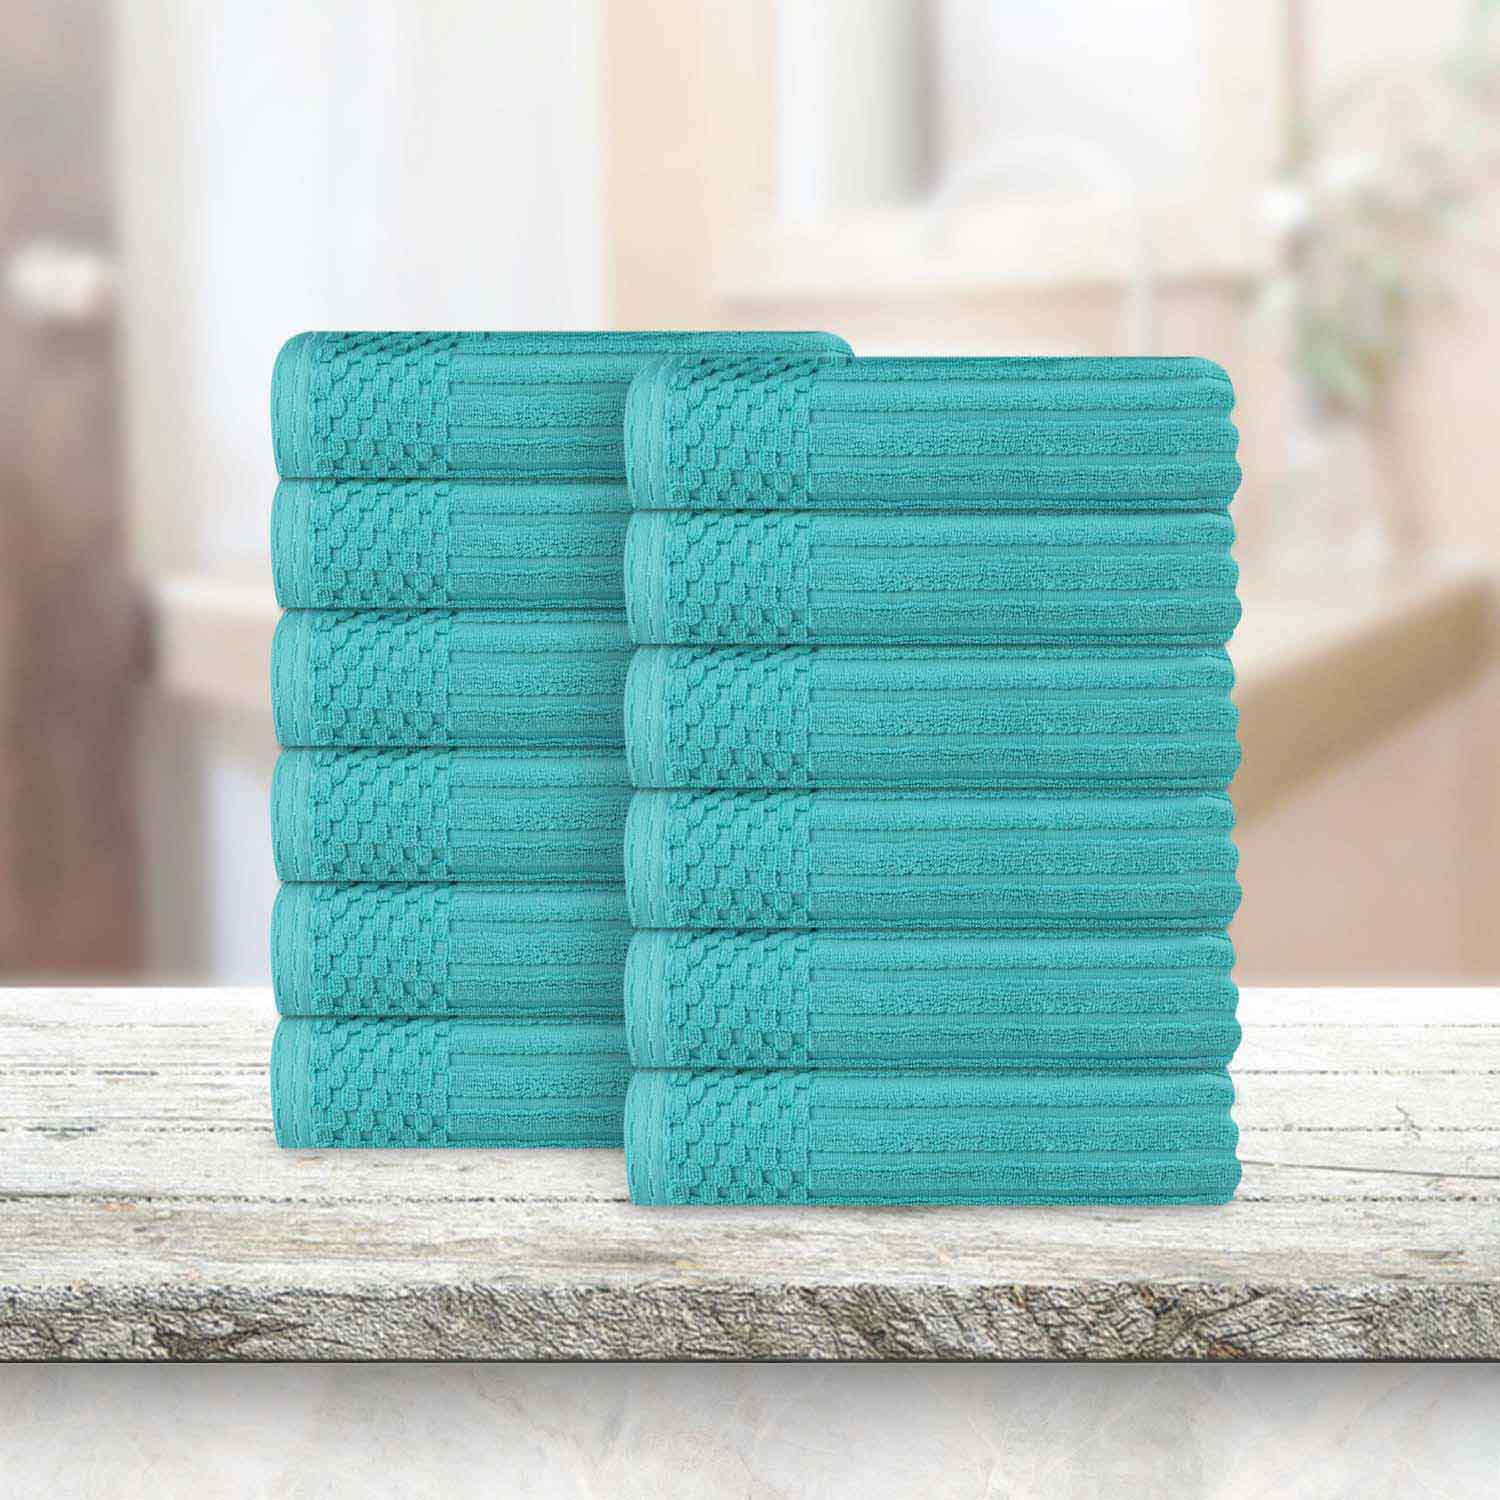 Soho Ribbed Cotton Absorbent Face Towel / Washcloth Set of 12 - Turquoise